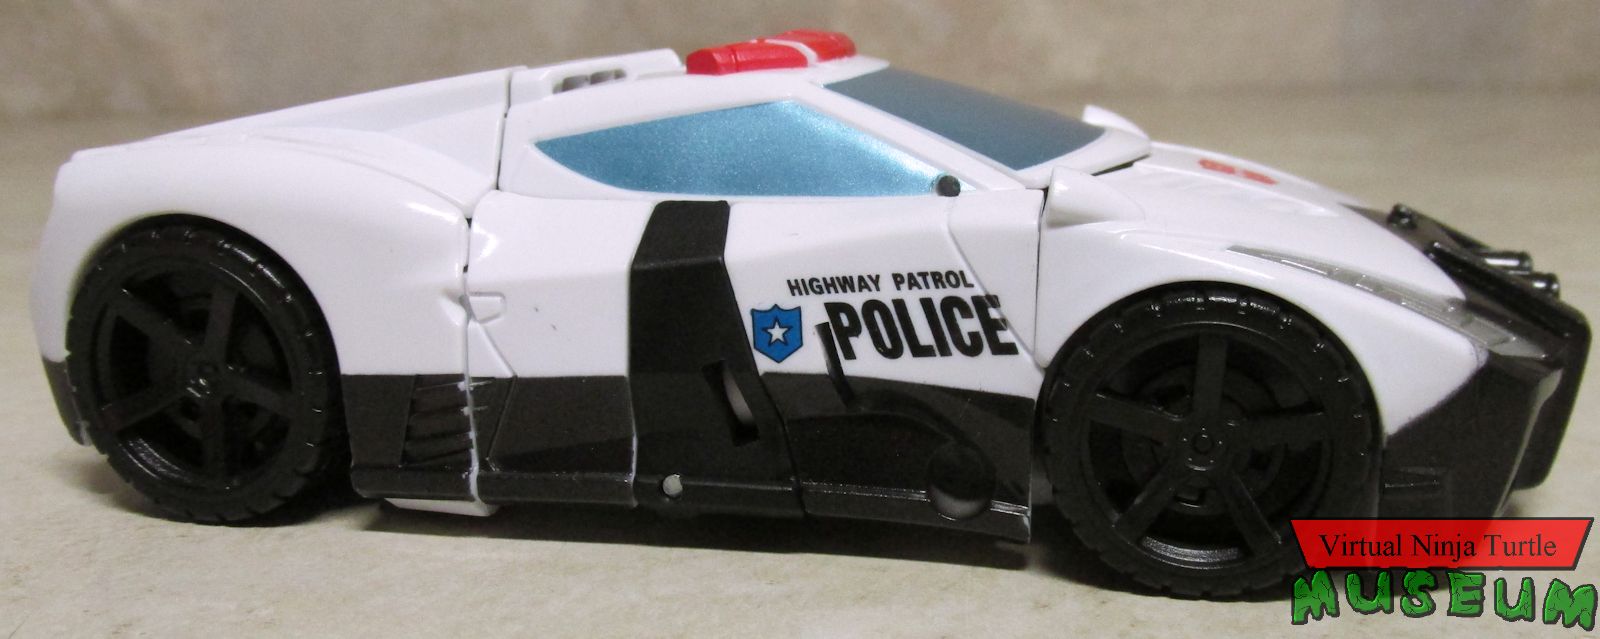 Prowl vehicle mode side view